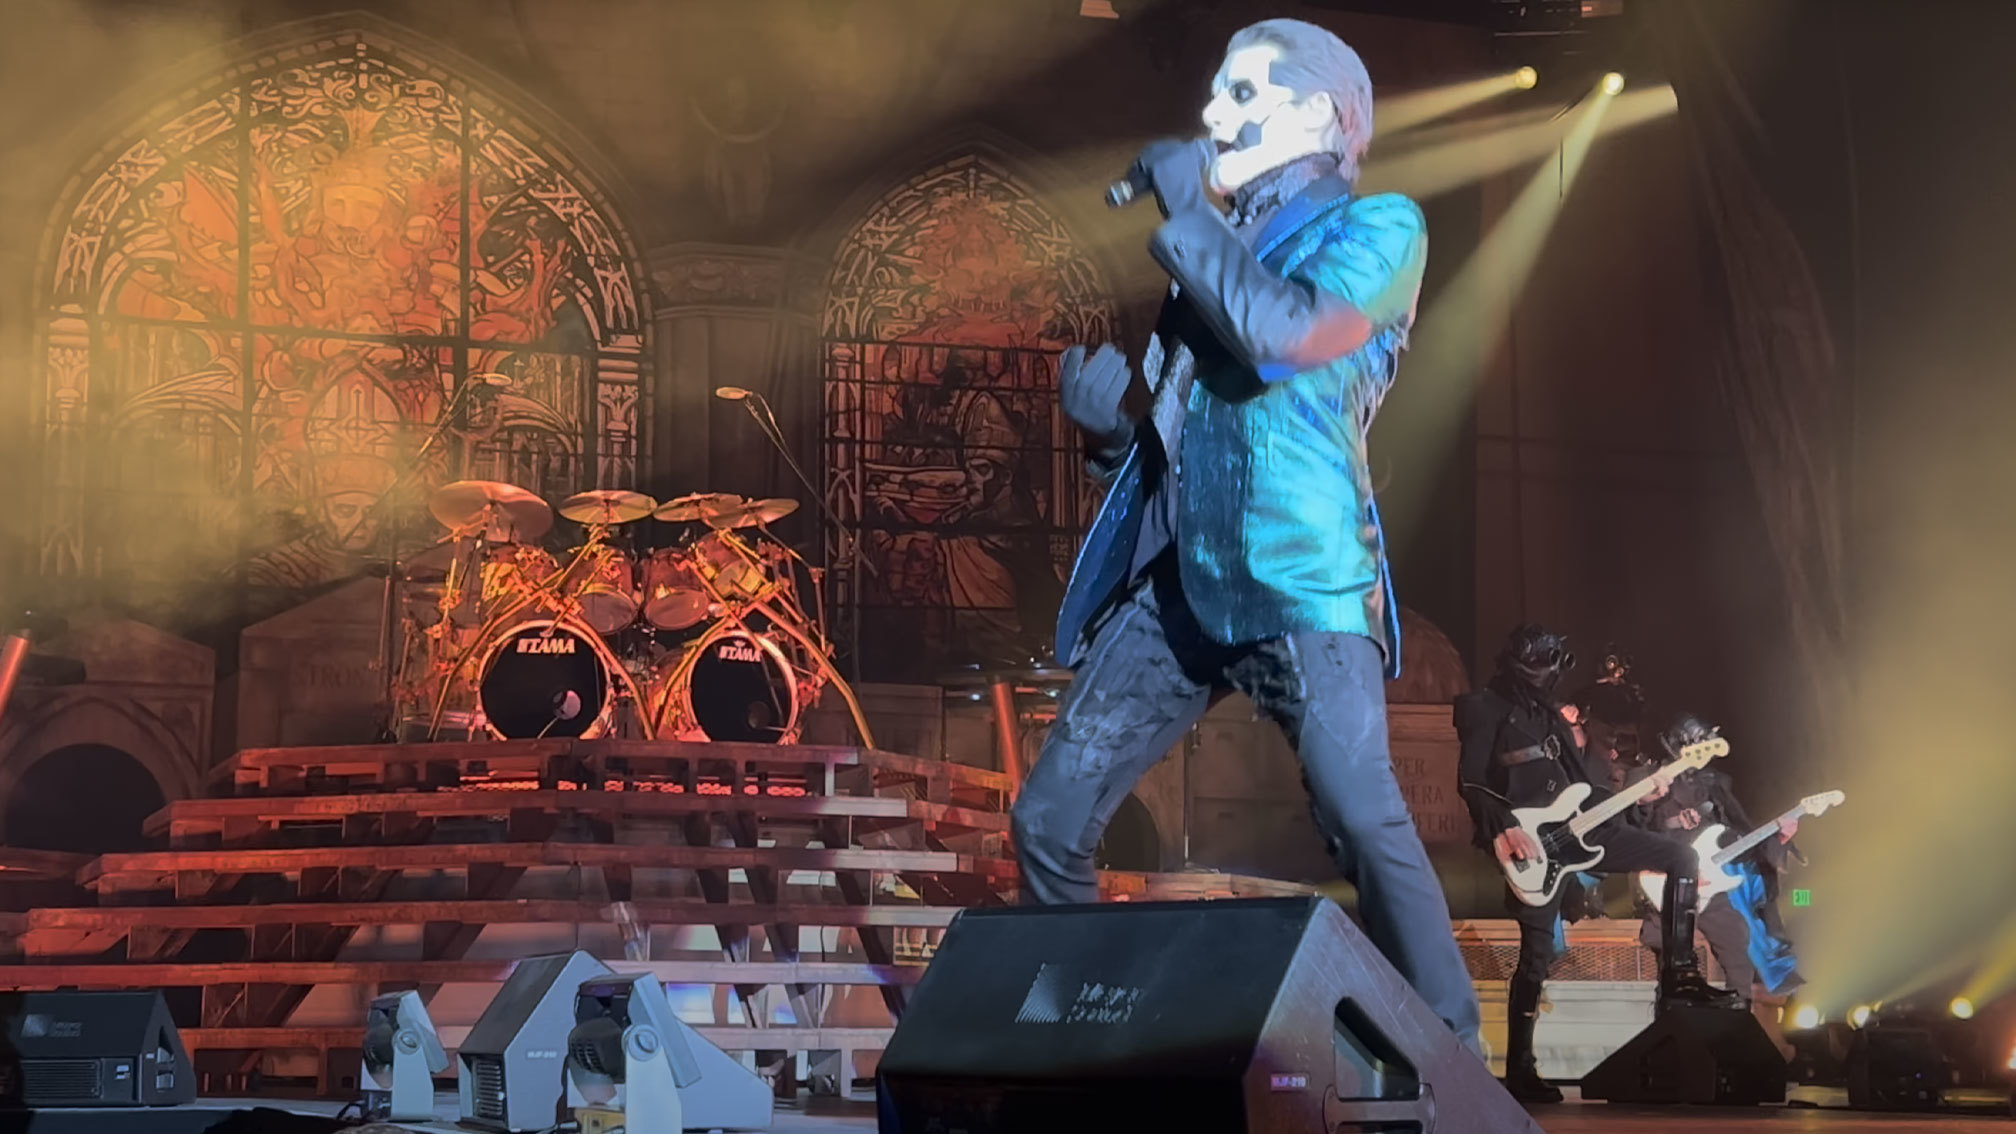 Concert: Ghost and Volbeat coming to El Paso in February 2022